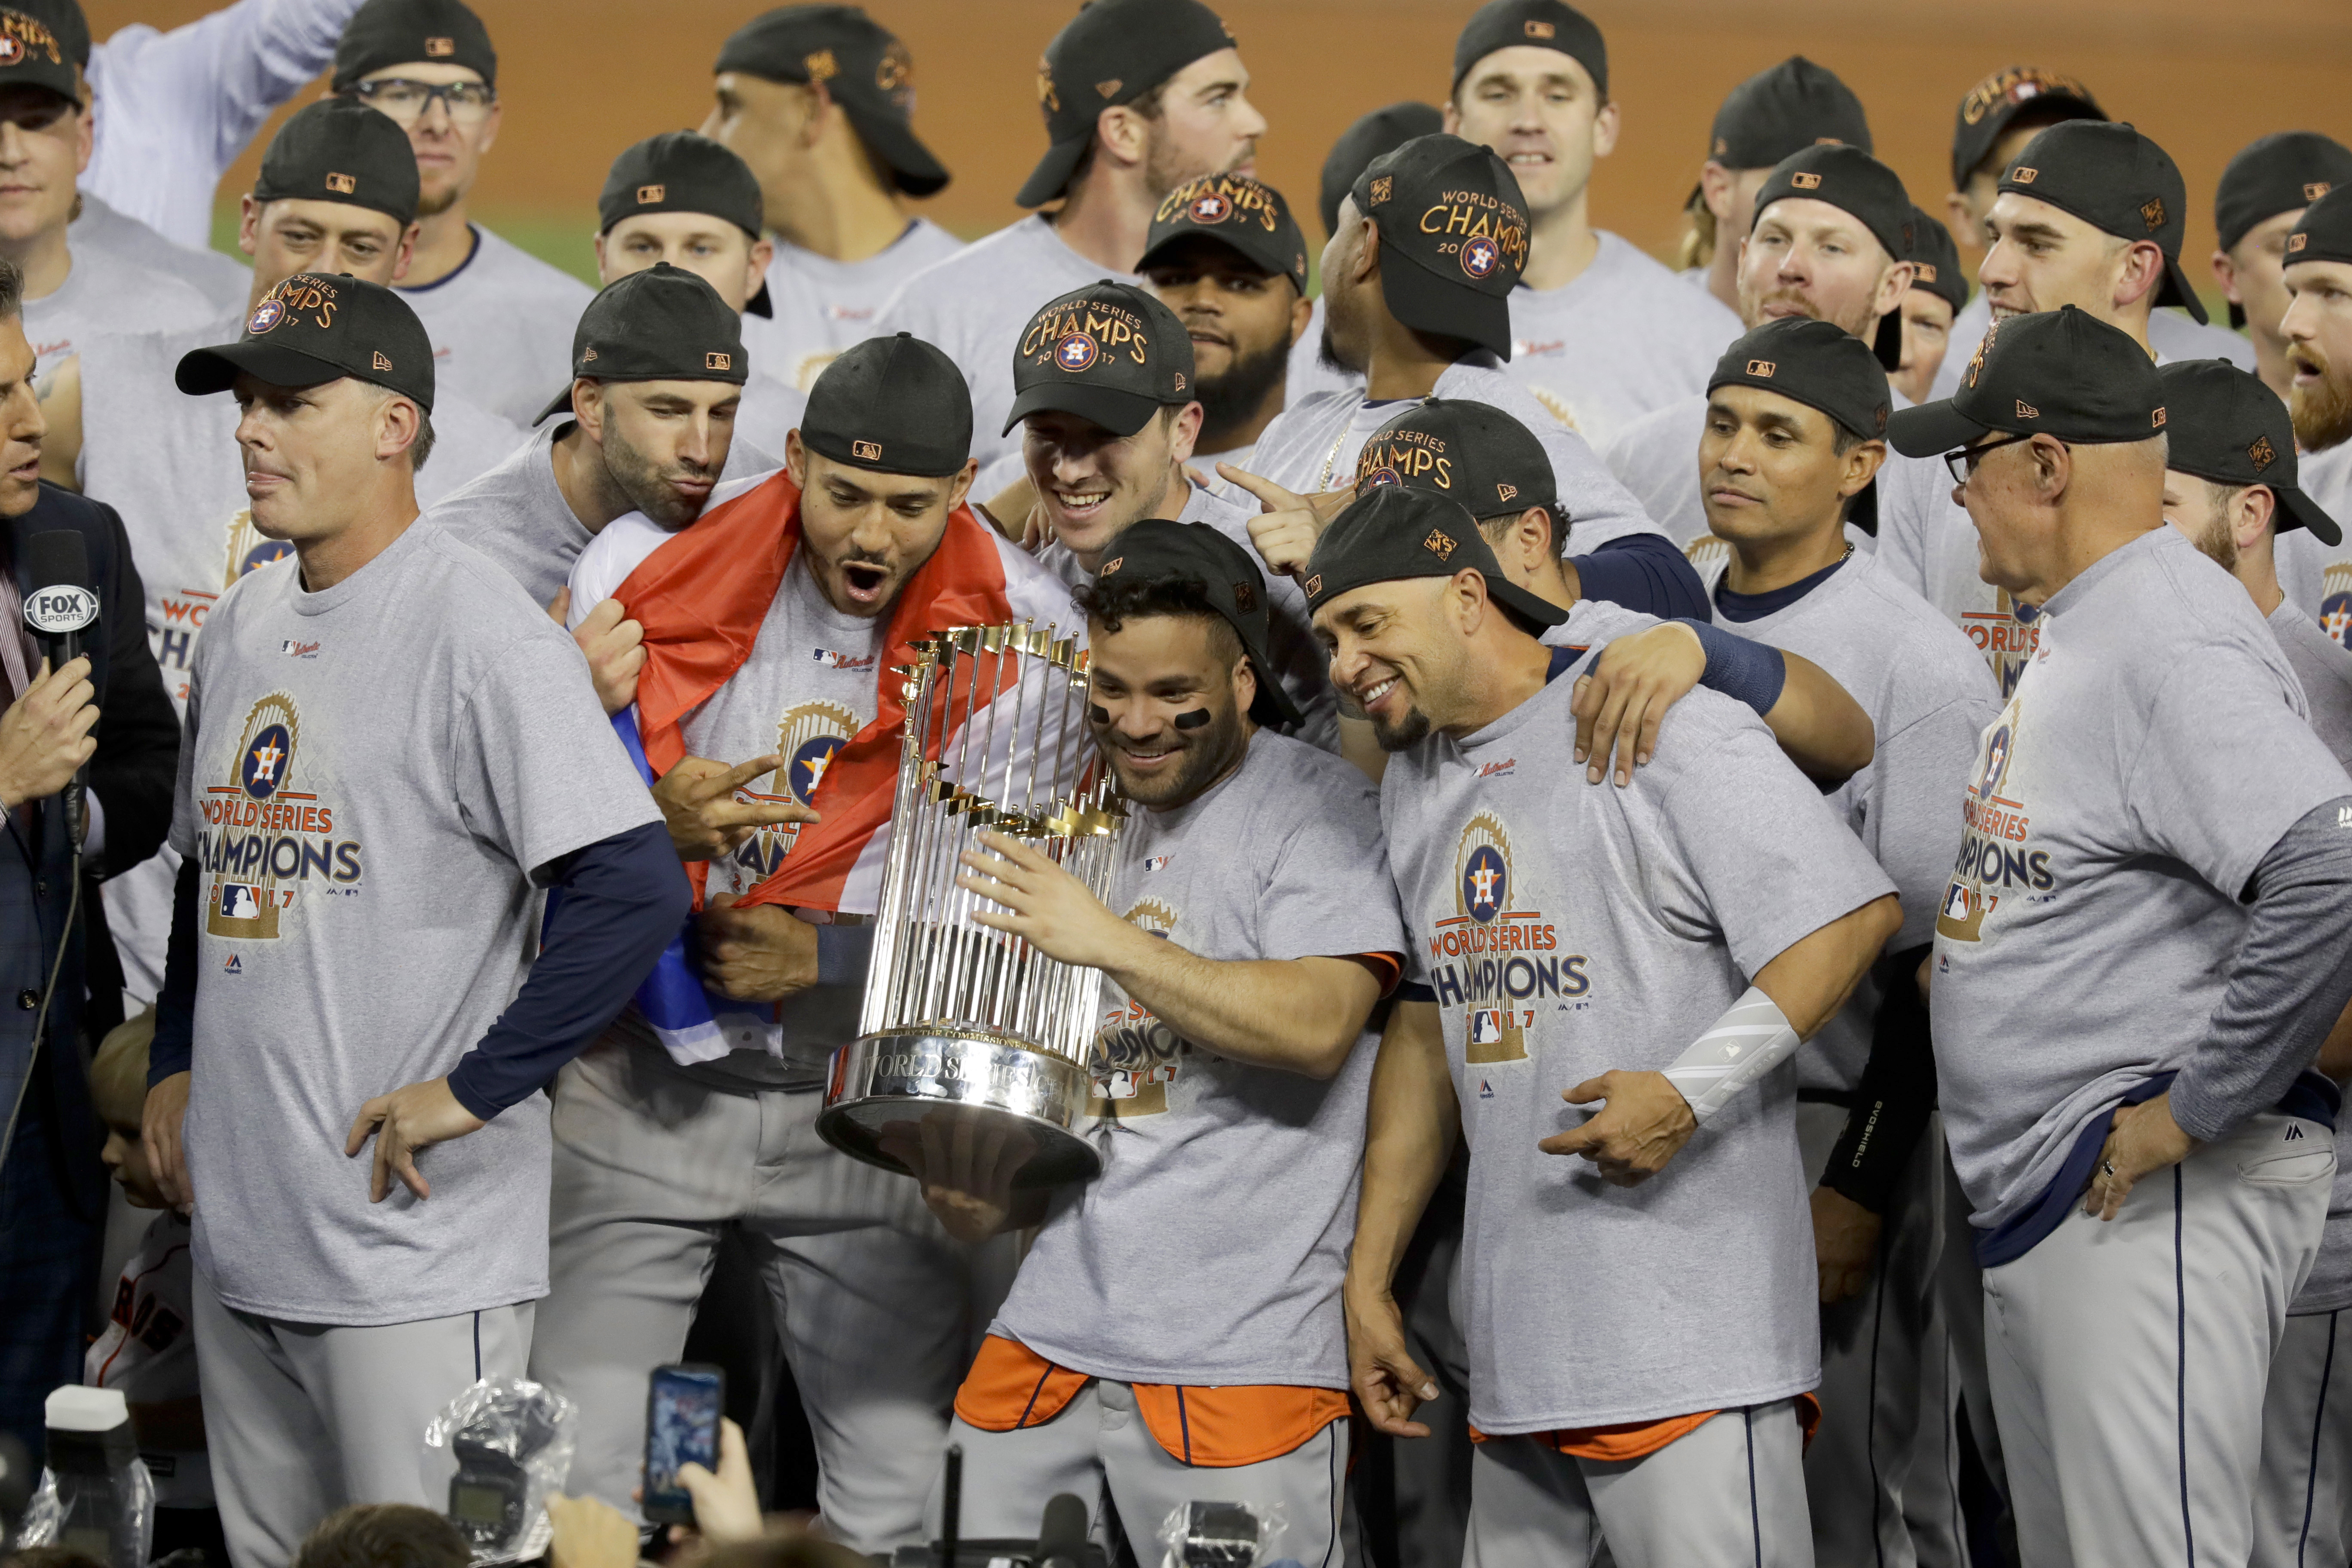 Did the Astros cheat in the 2017 World Series? - Quora